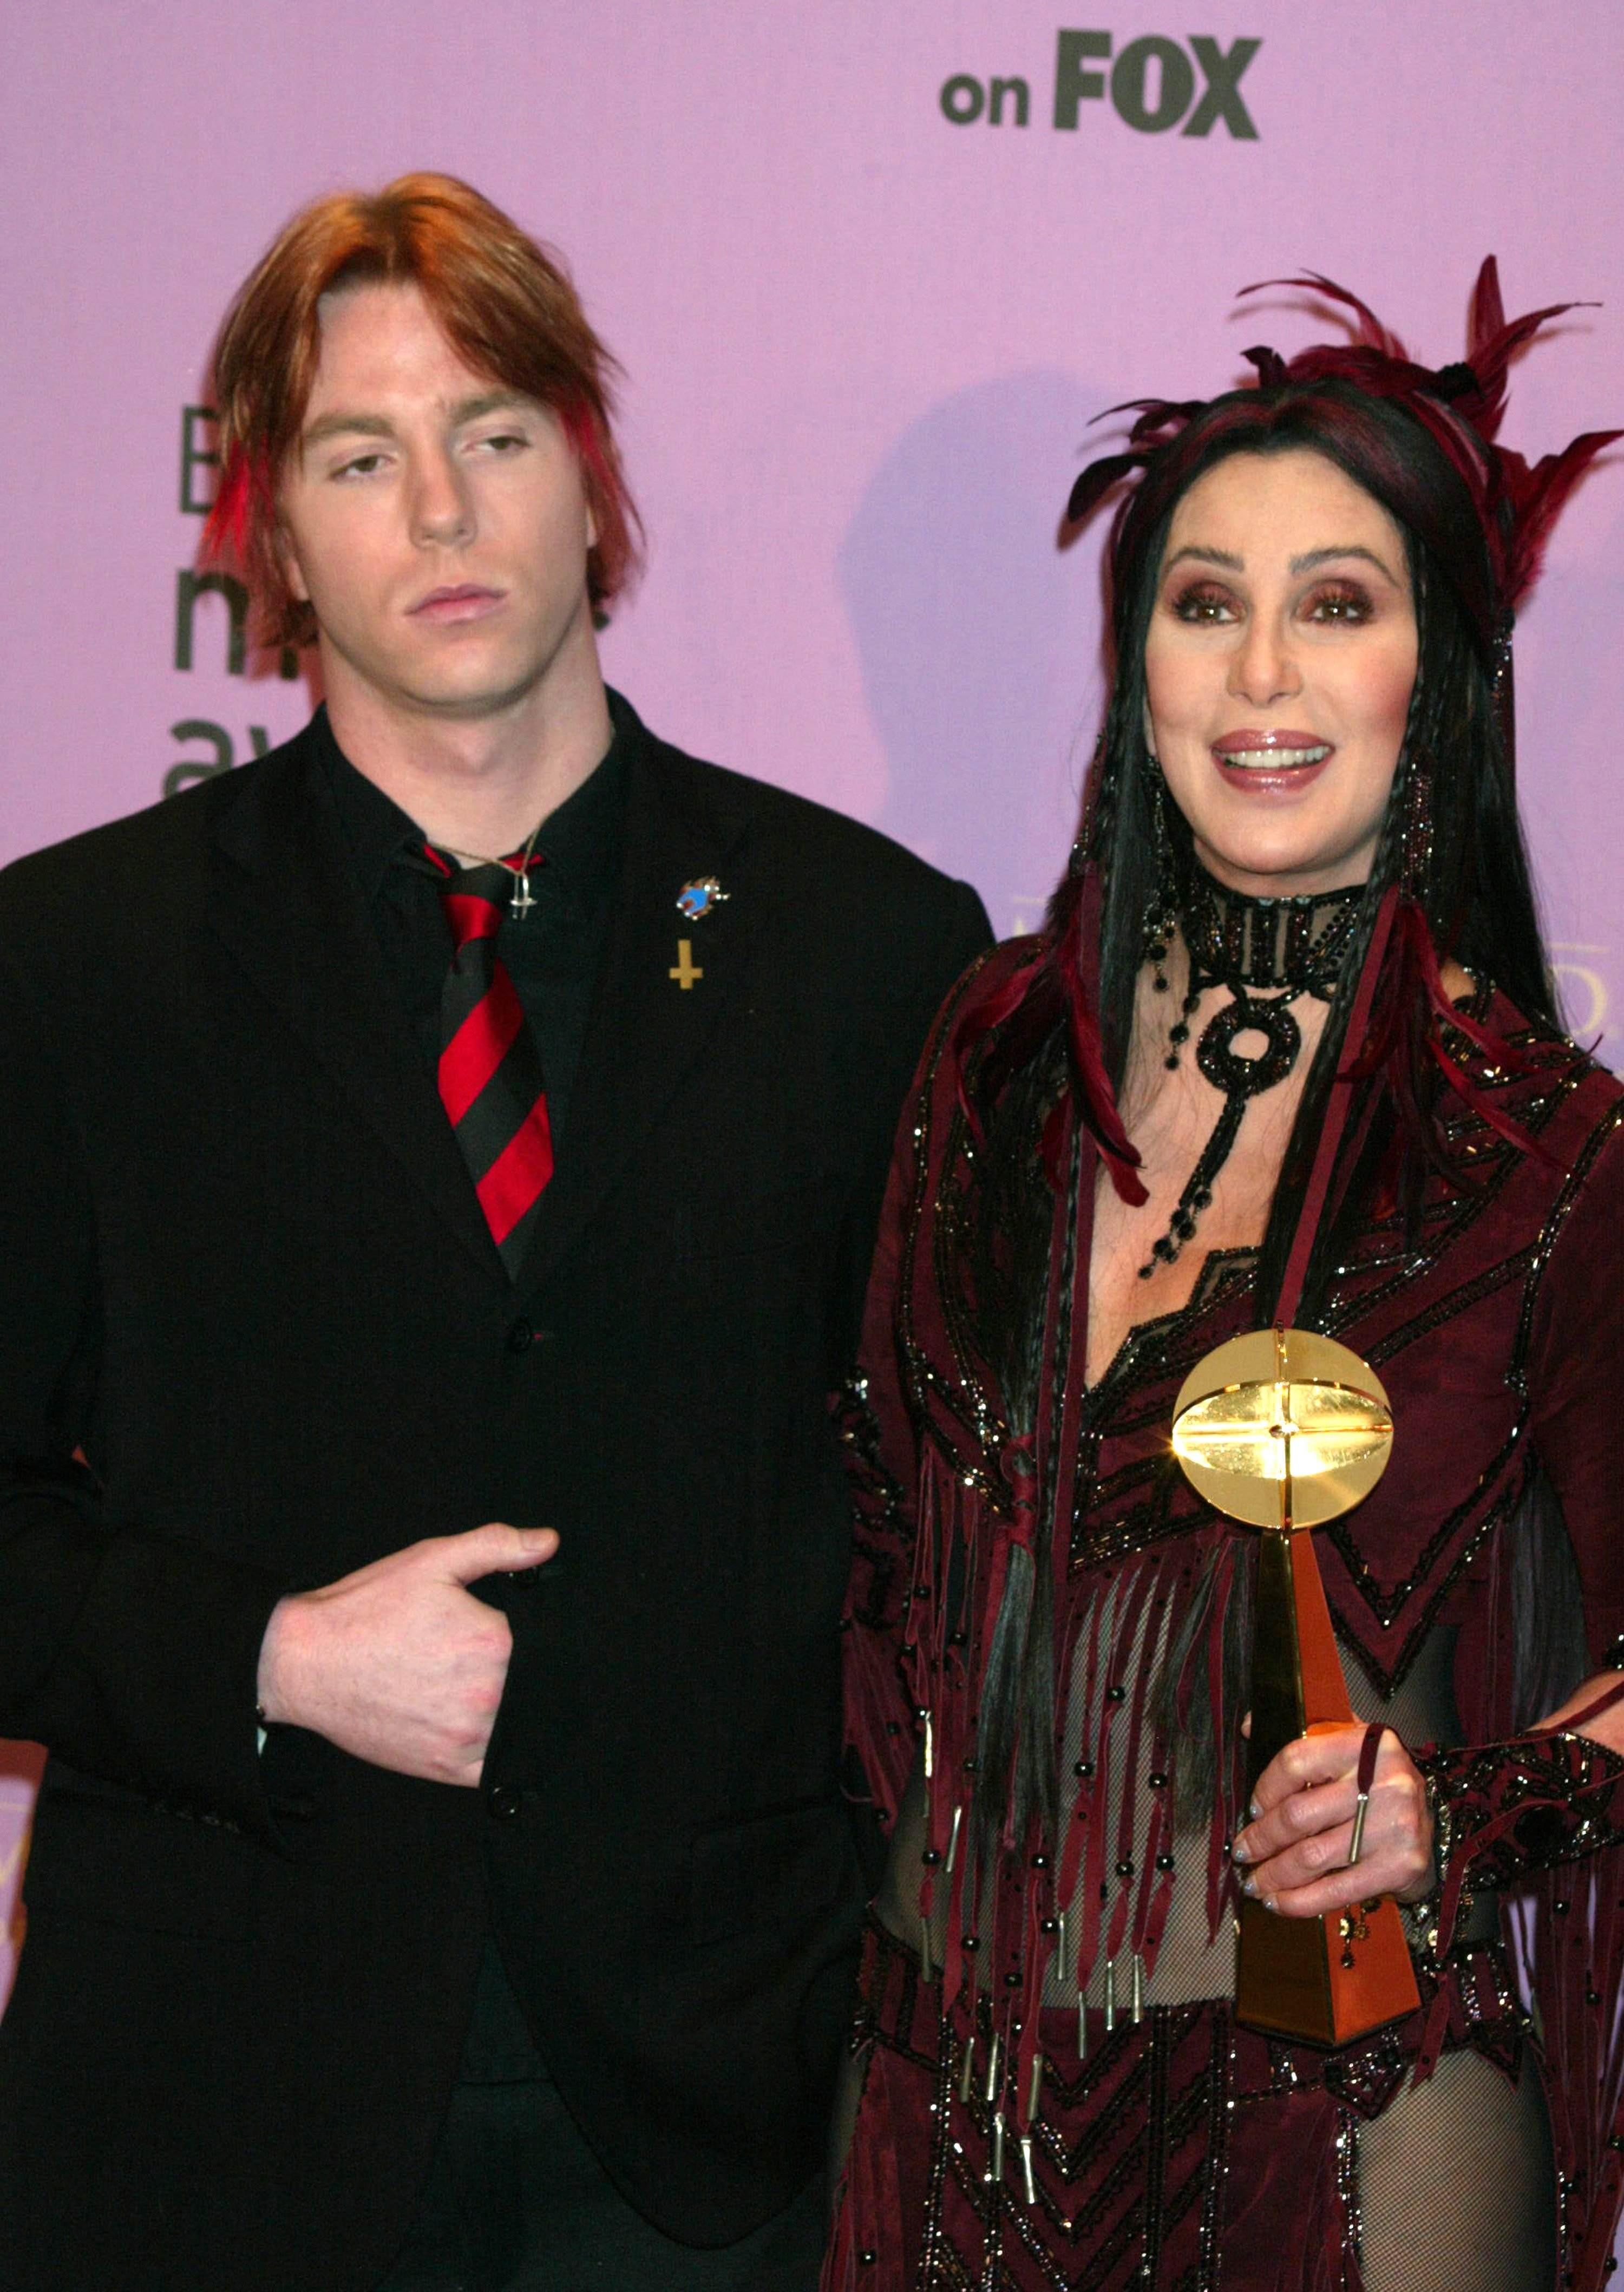 Cher and son Elijah Blue Allman. | Source: Getty Images